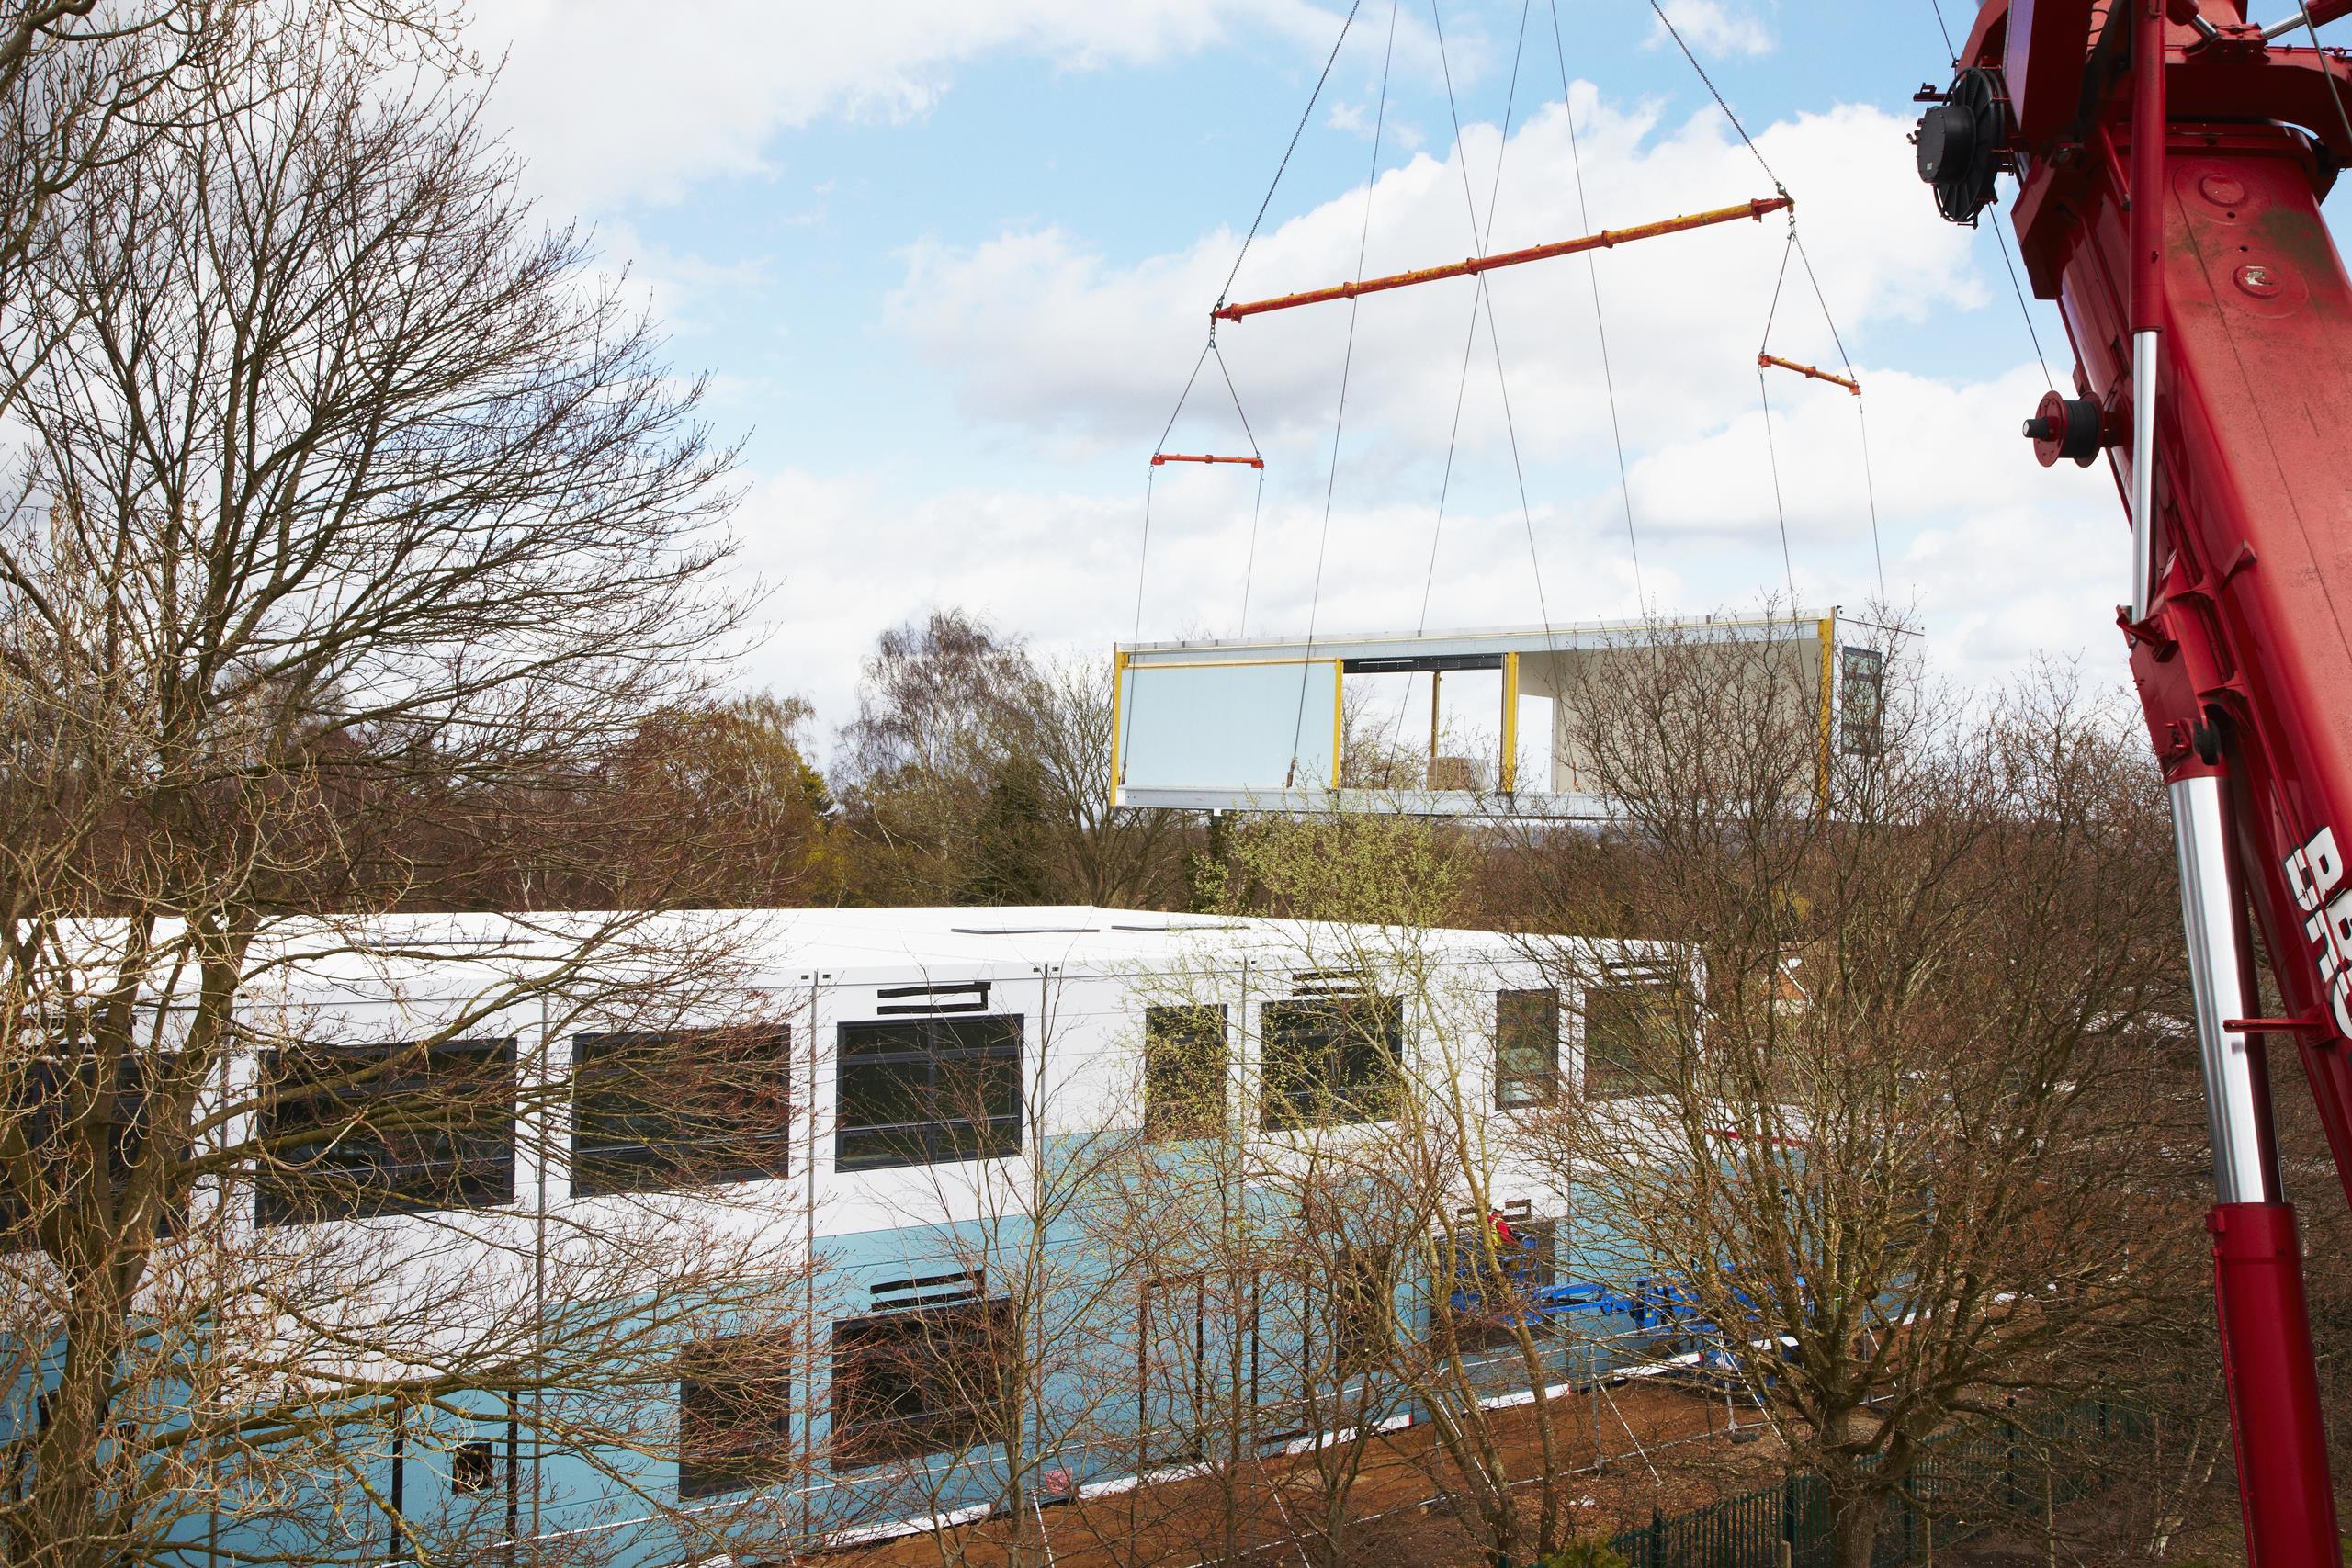 Part of Pyrford Primary School's Yorkon design building being craned onto the rest of the building